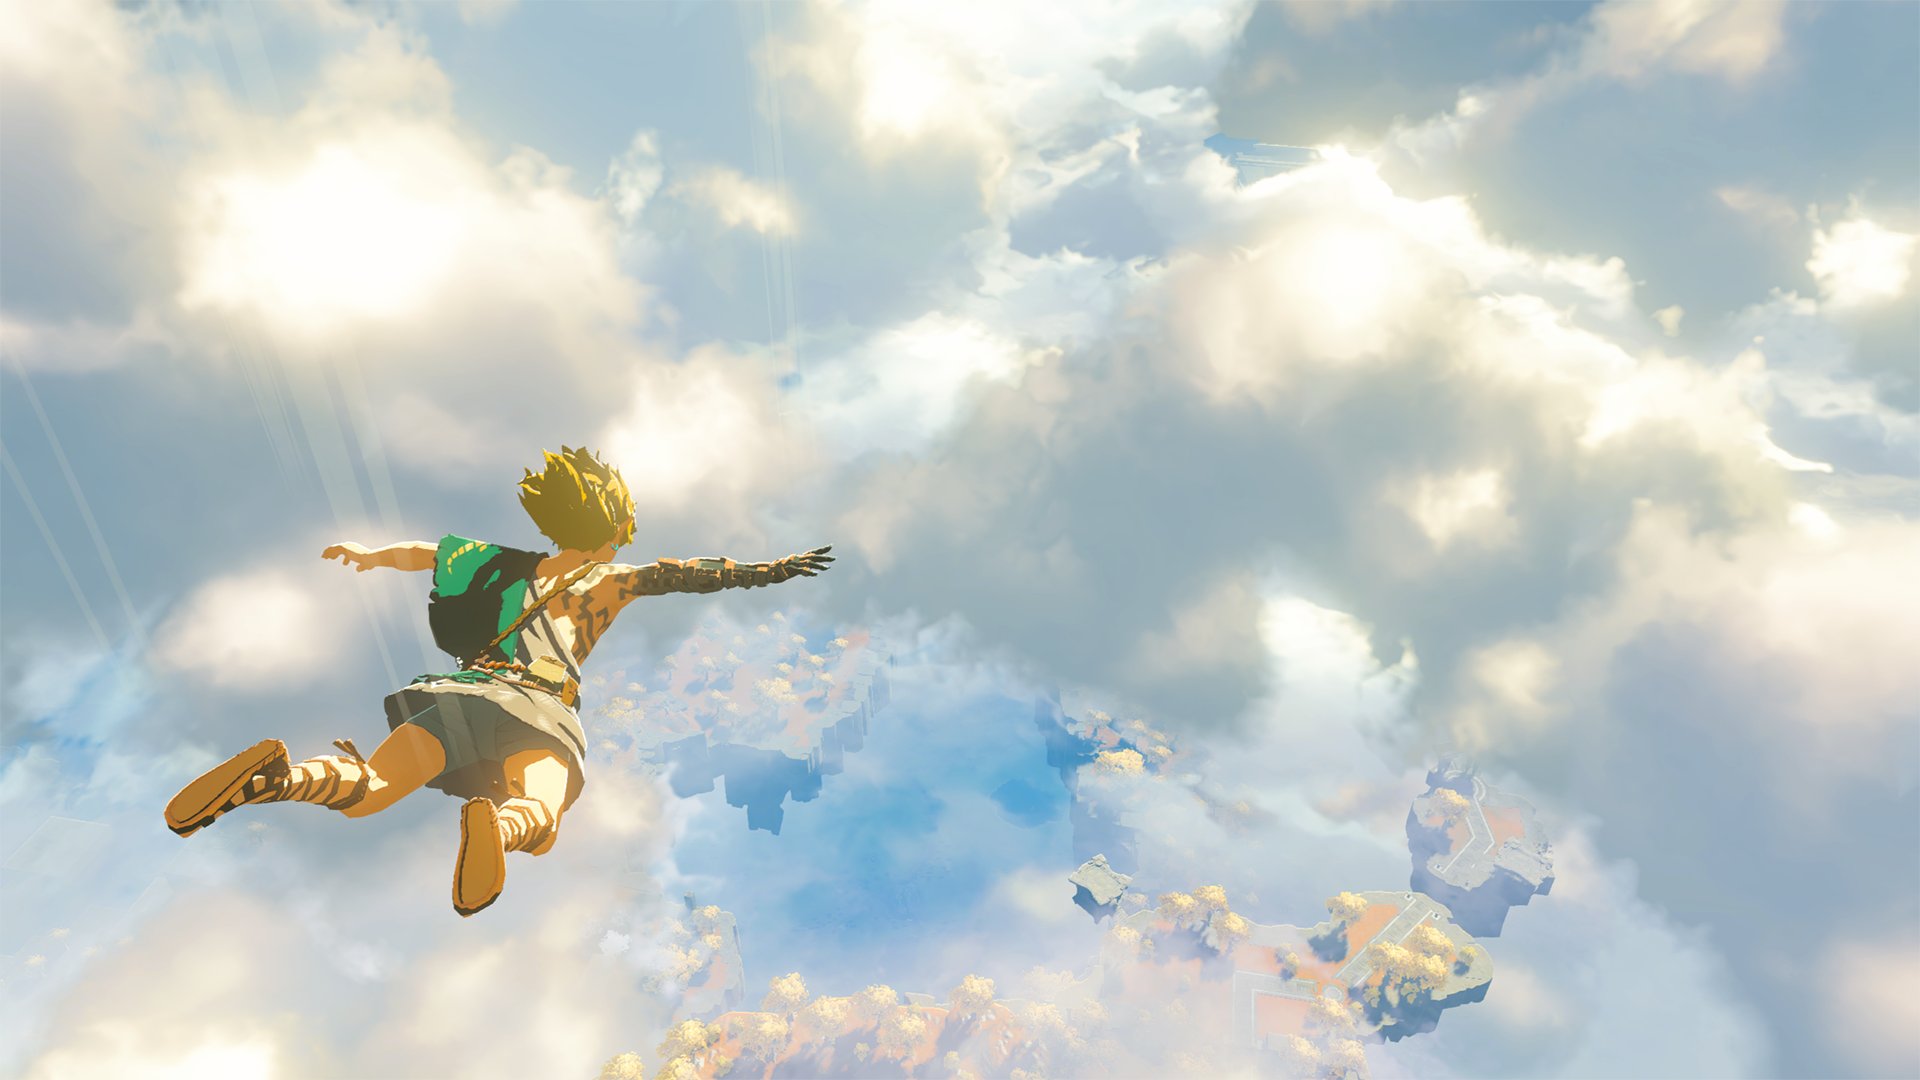 🚨Why Zelda Breath of the Wild 2 Is MISSING🚨 